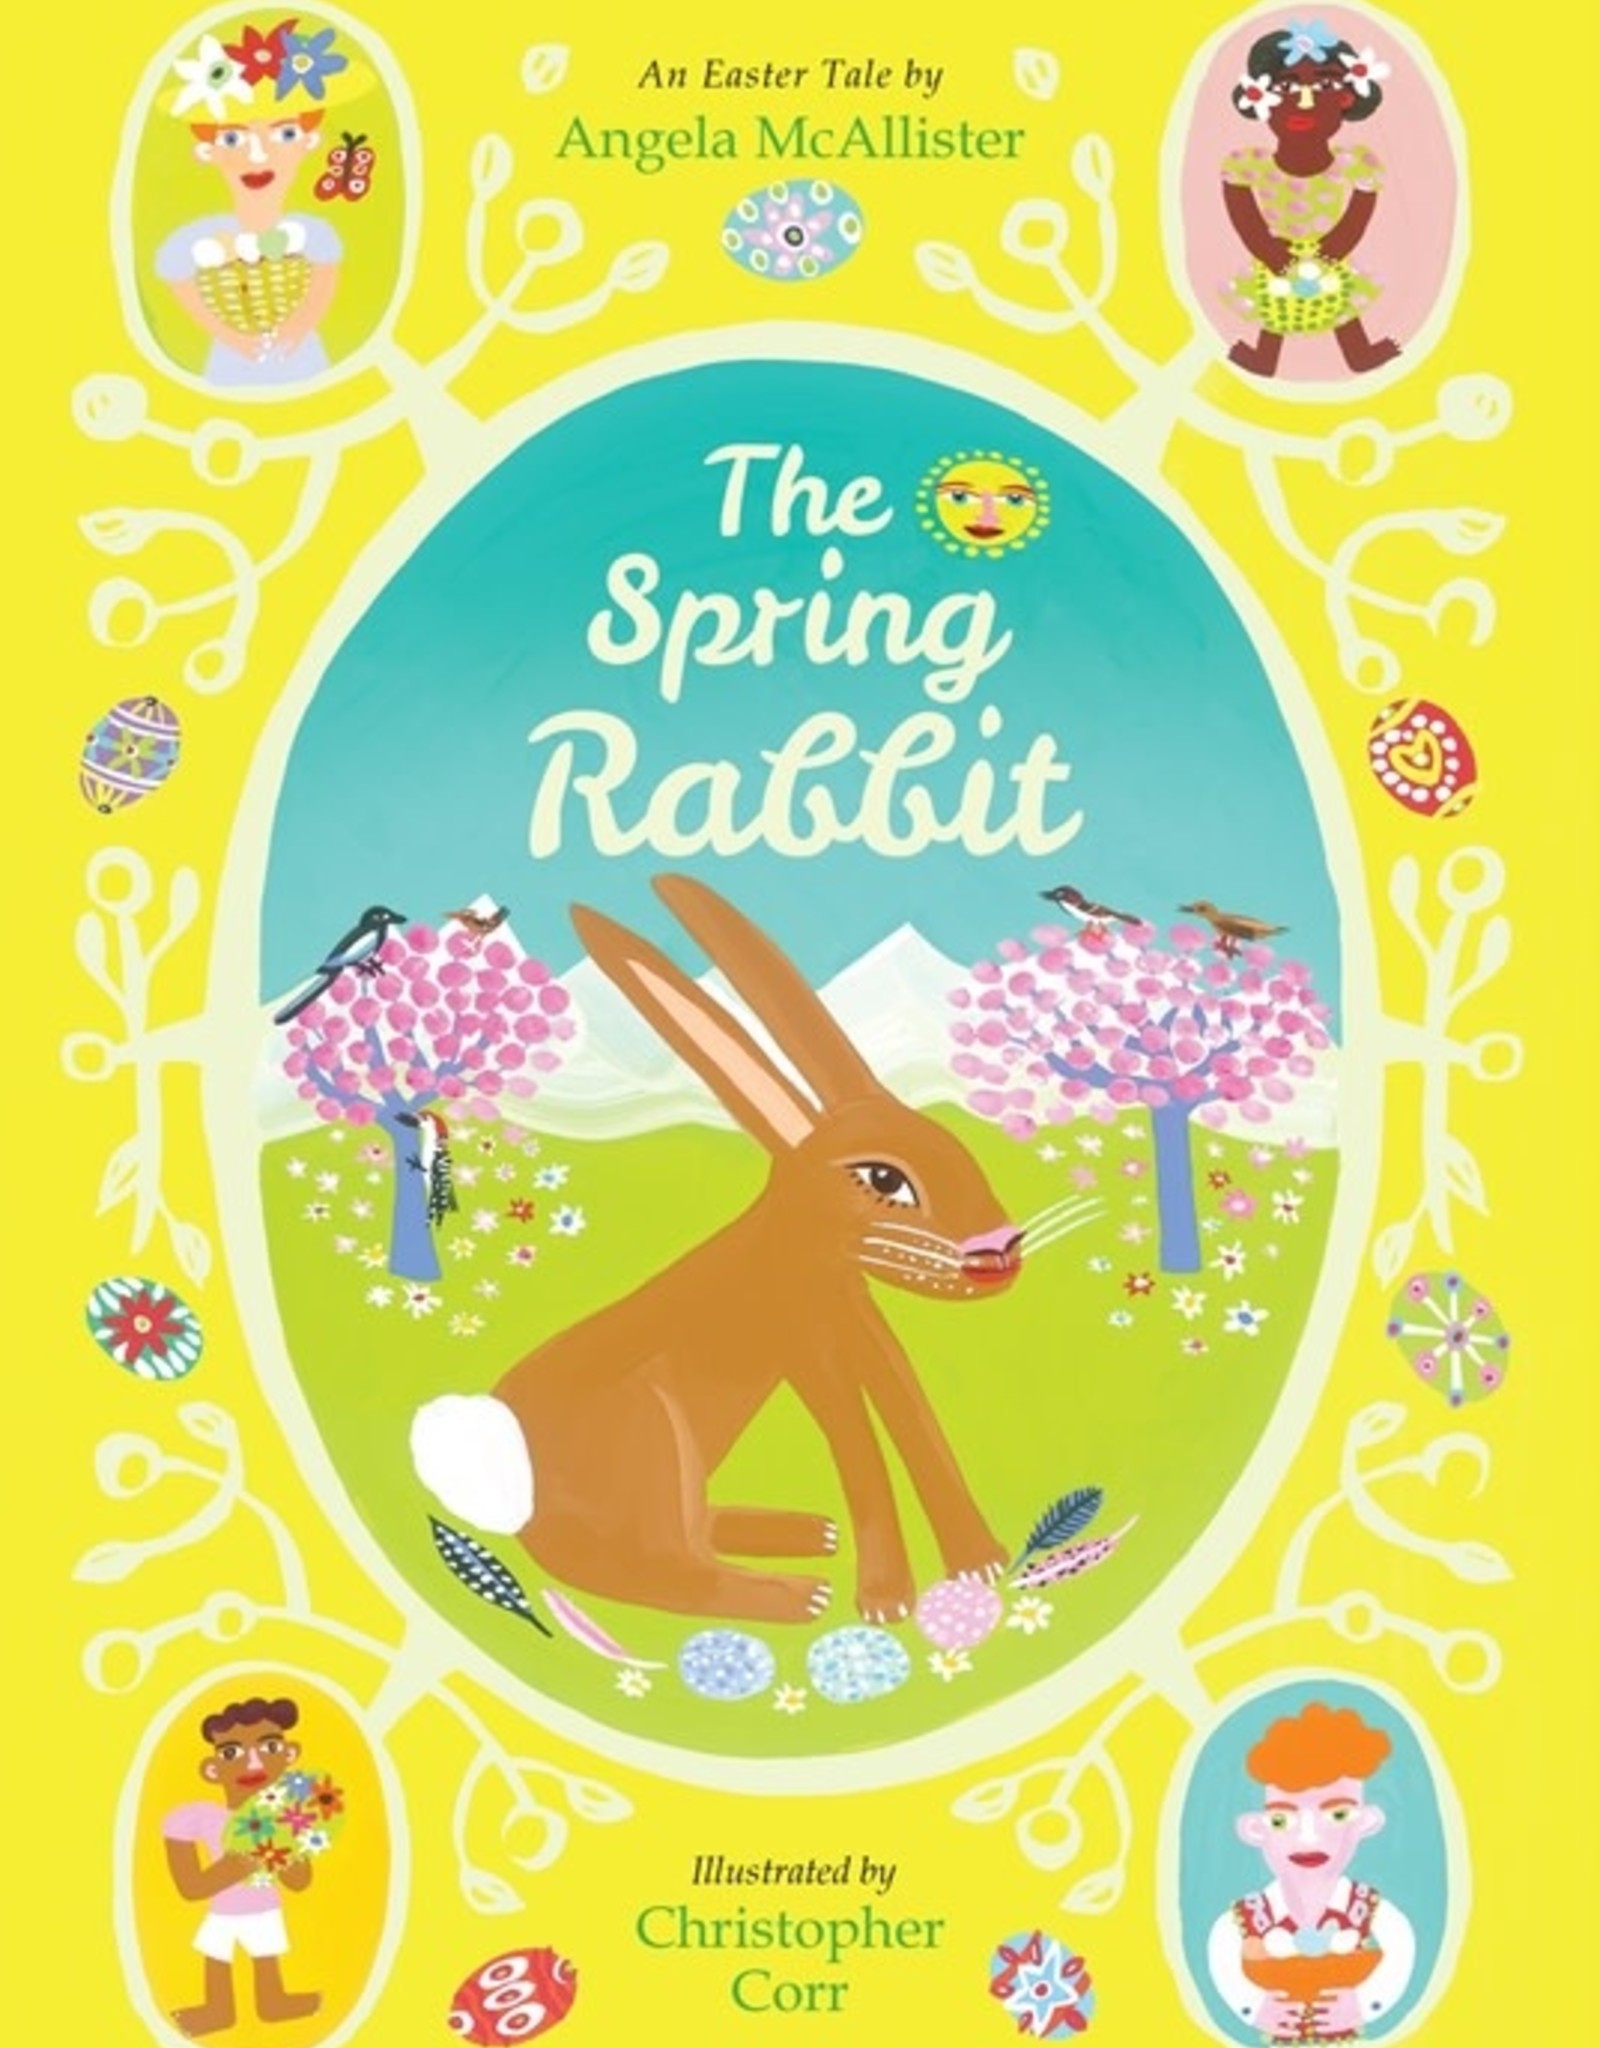 ##The Spring Rabbit: An Easter Tale